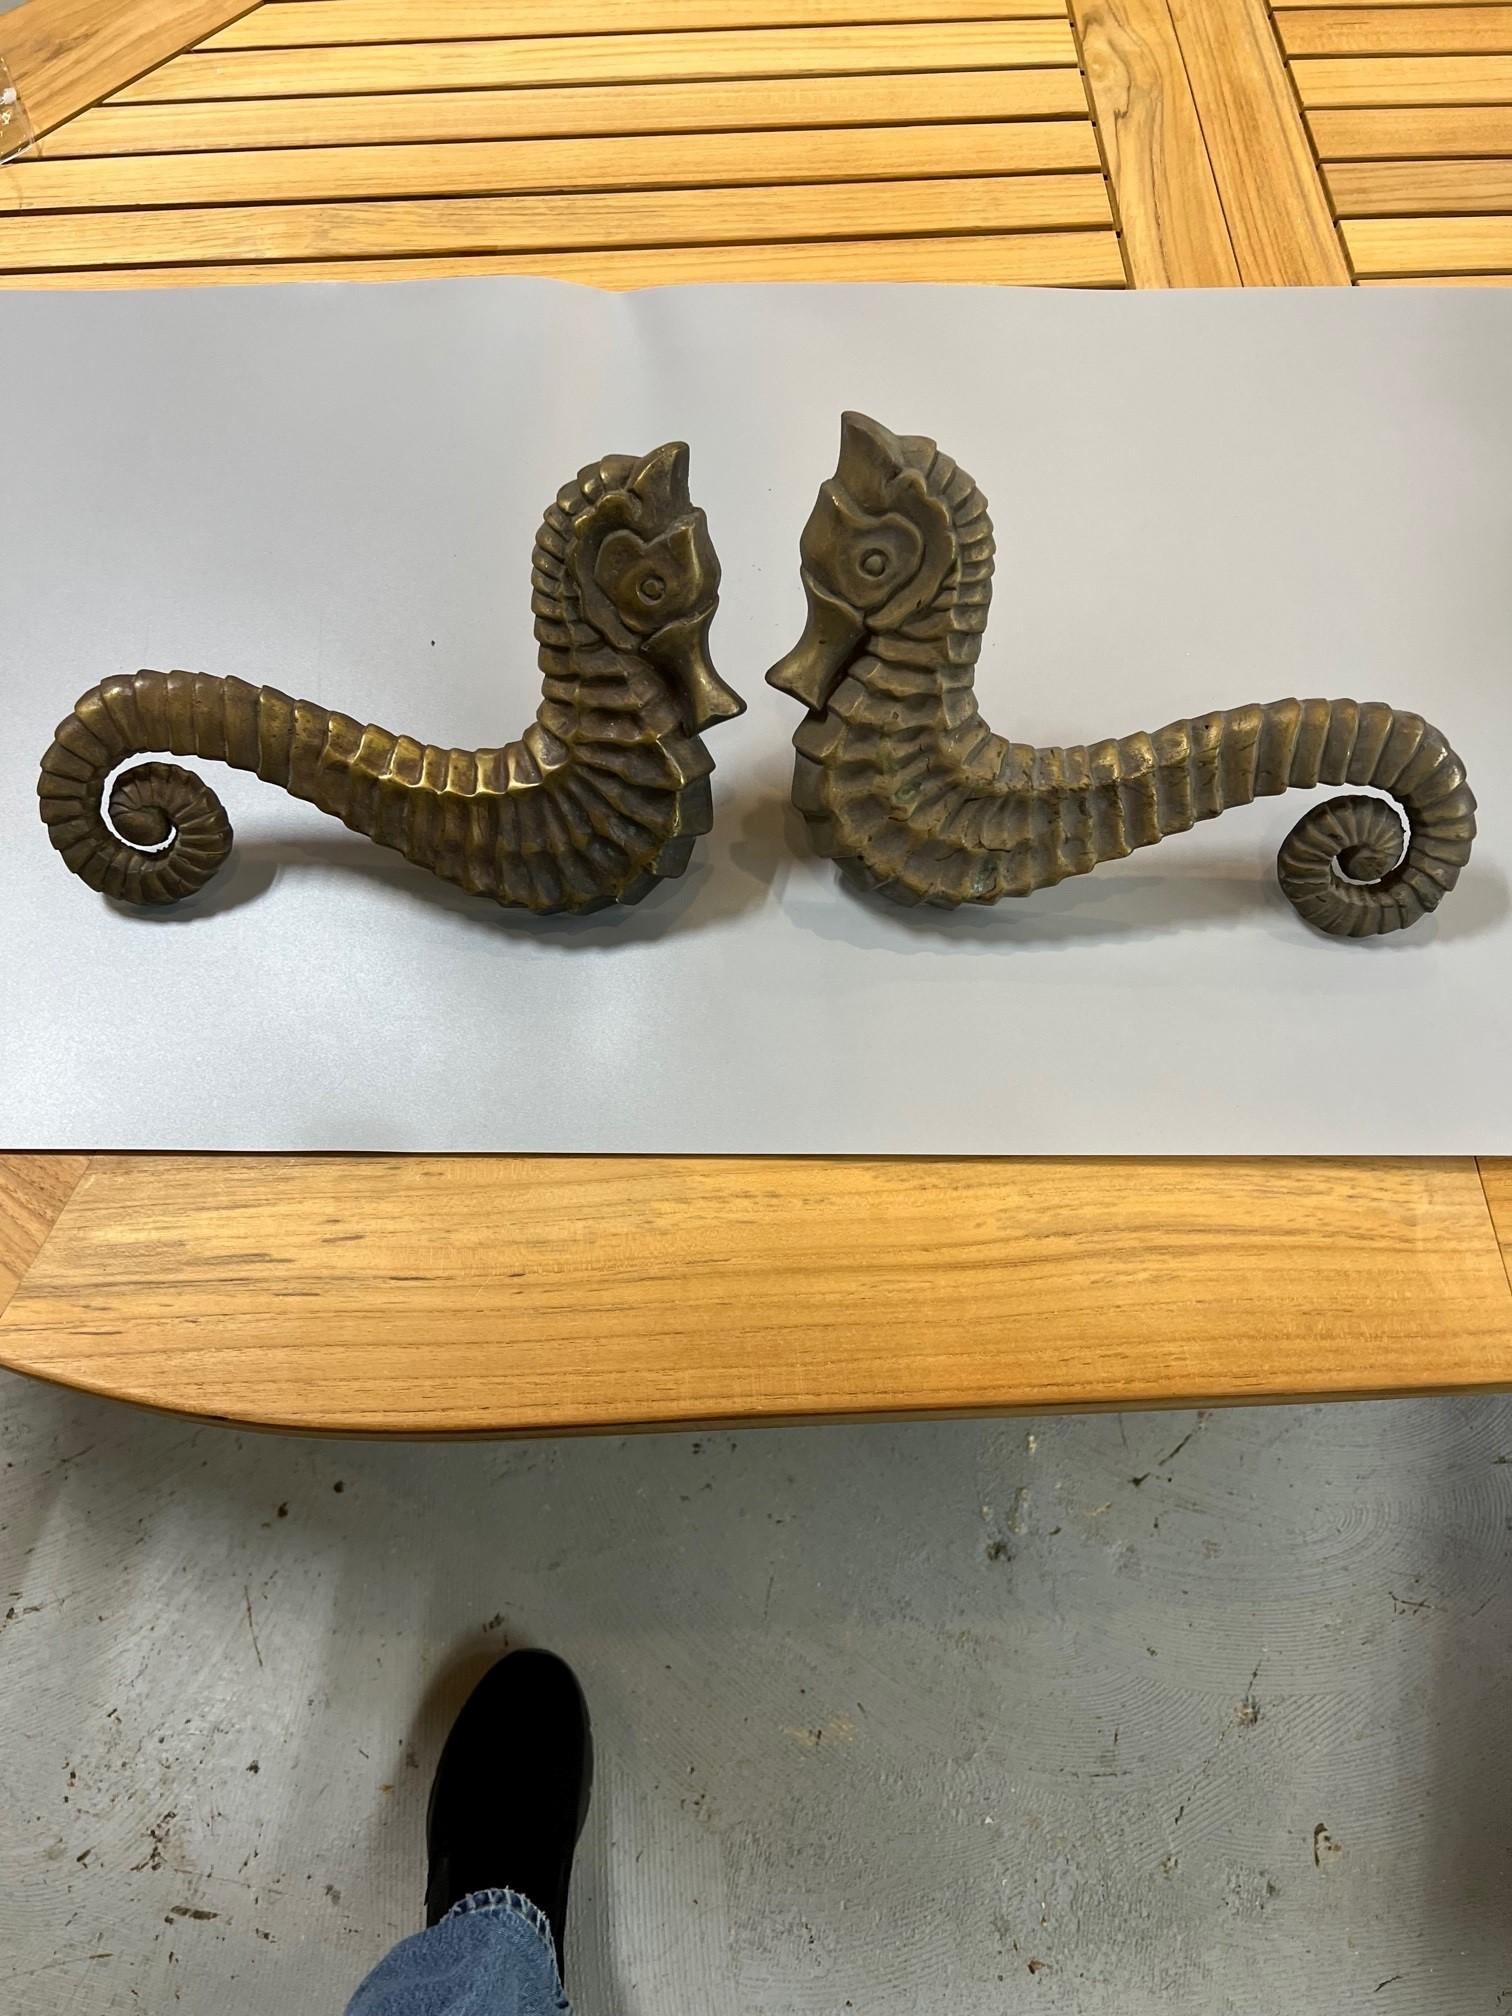 Two pairs of magnificent antique bronze seahorse door handles. They would look great in a restaurant or a home on the shore. Salvaged from an Upstate New York estate, a good find that would look beautiful on a large pair of wooden doors. They have a